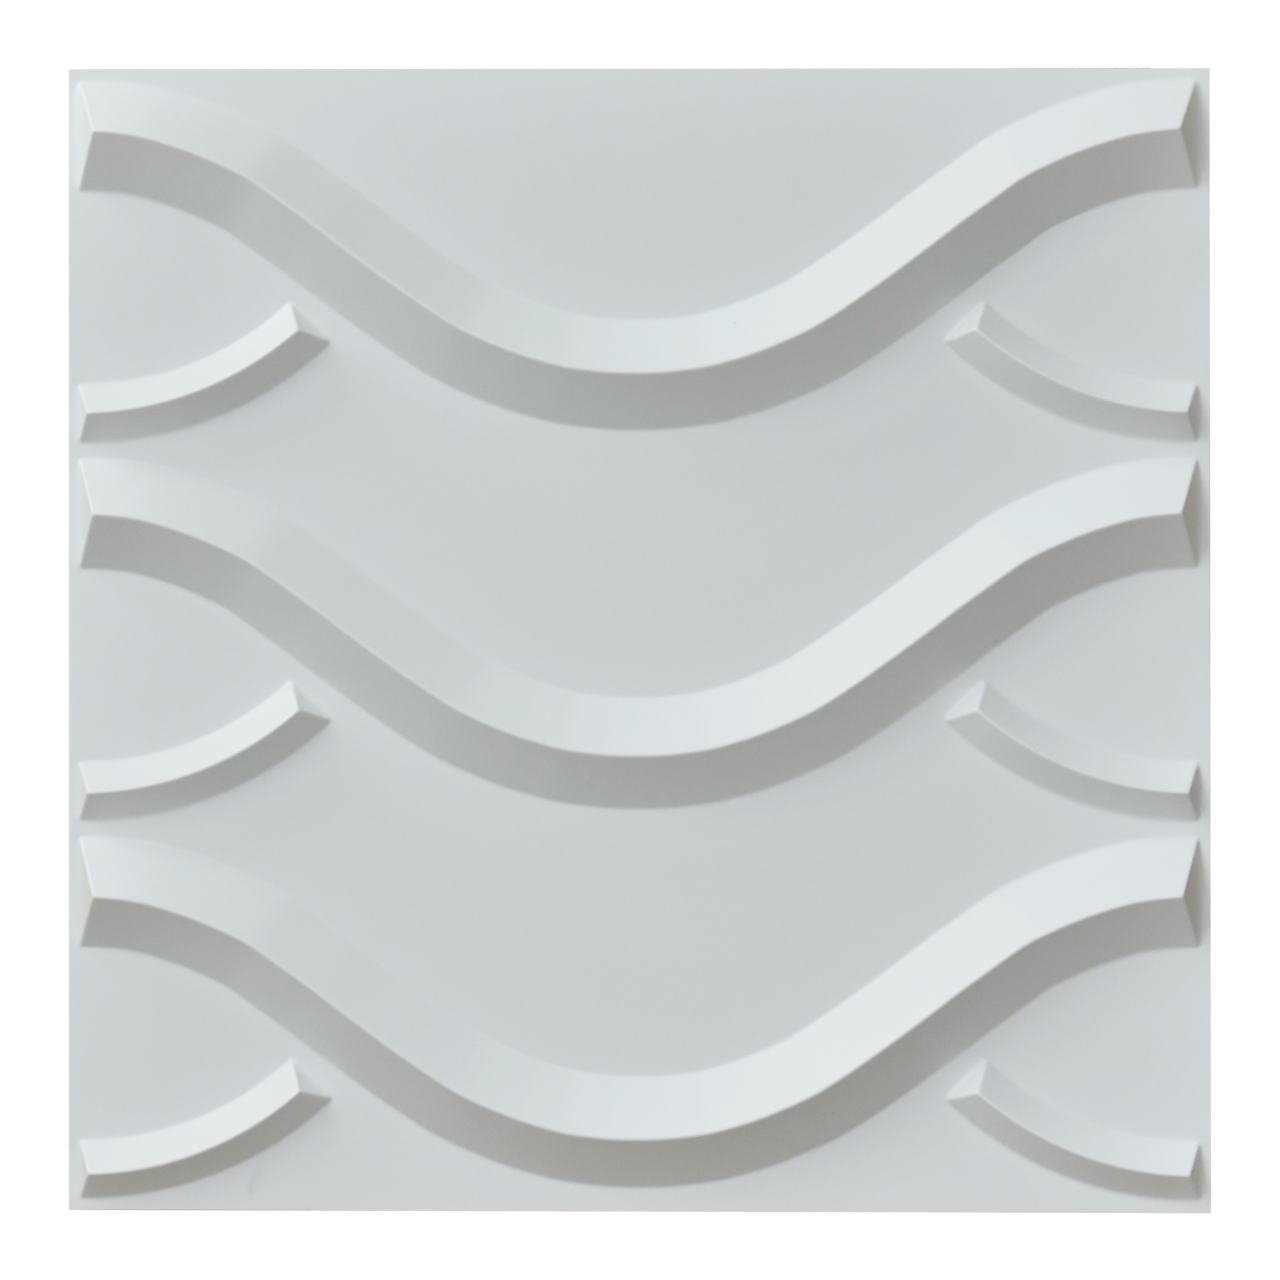 3D Wall Panel PVC Textured Wall Wave Design, White, 12 Tiles 32 SF